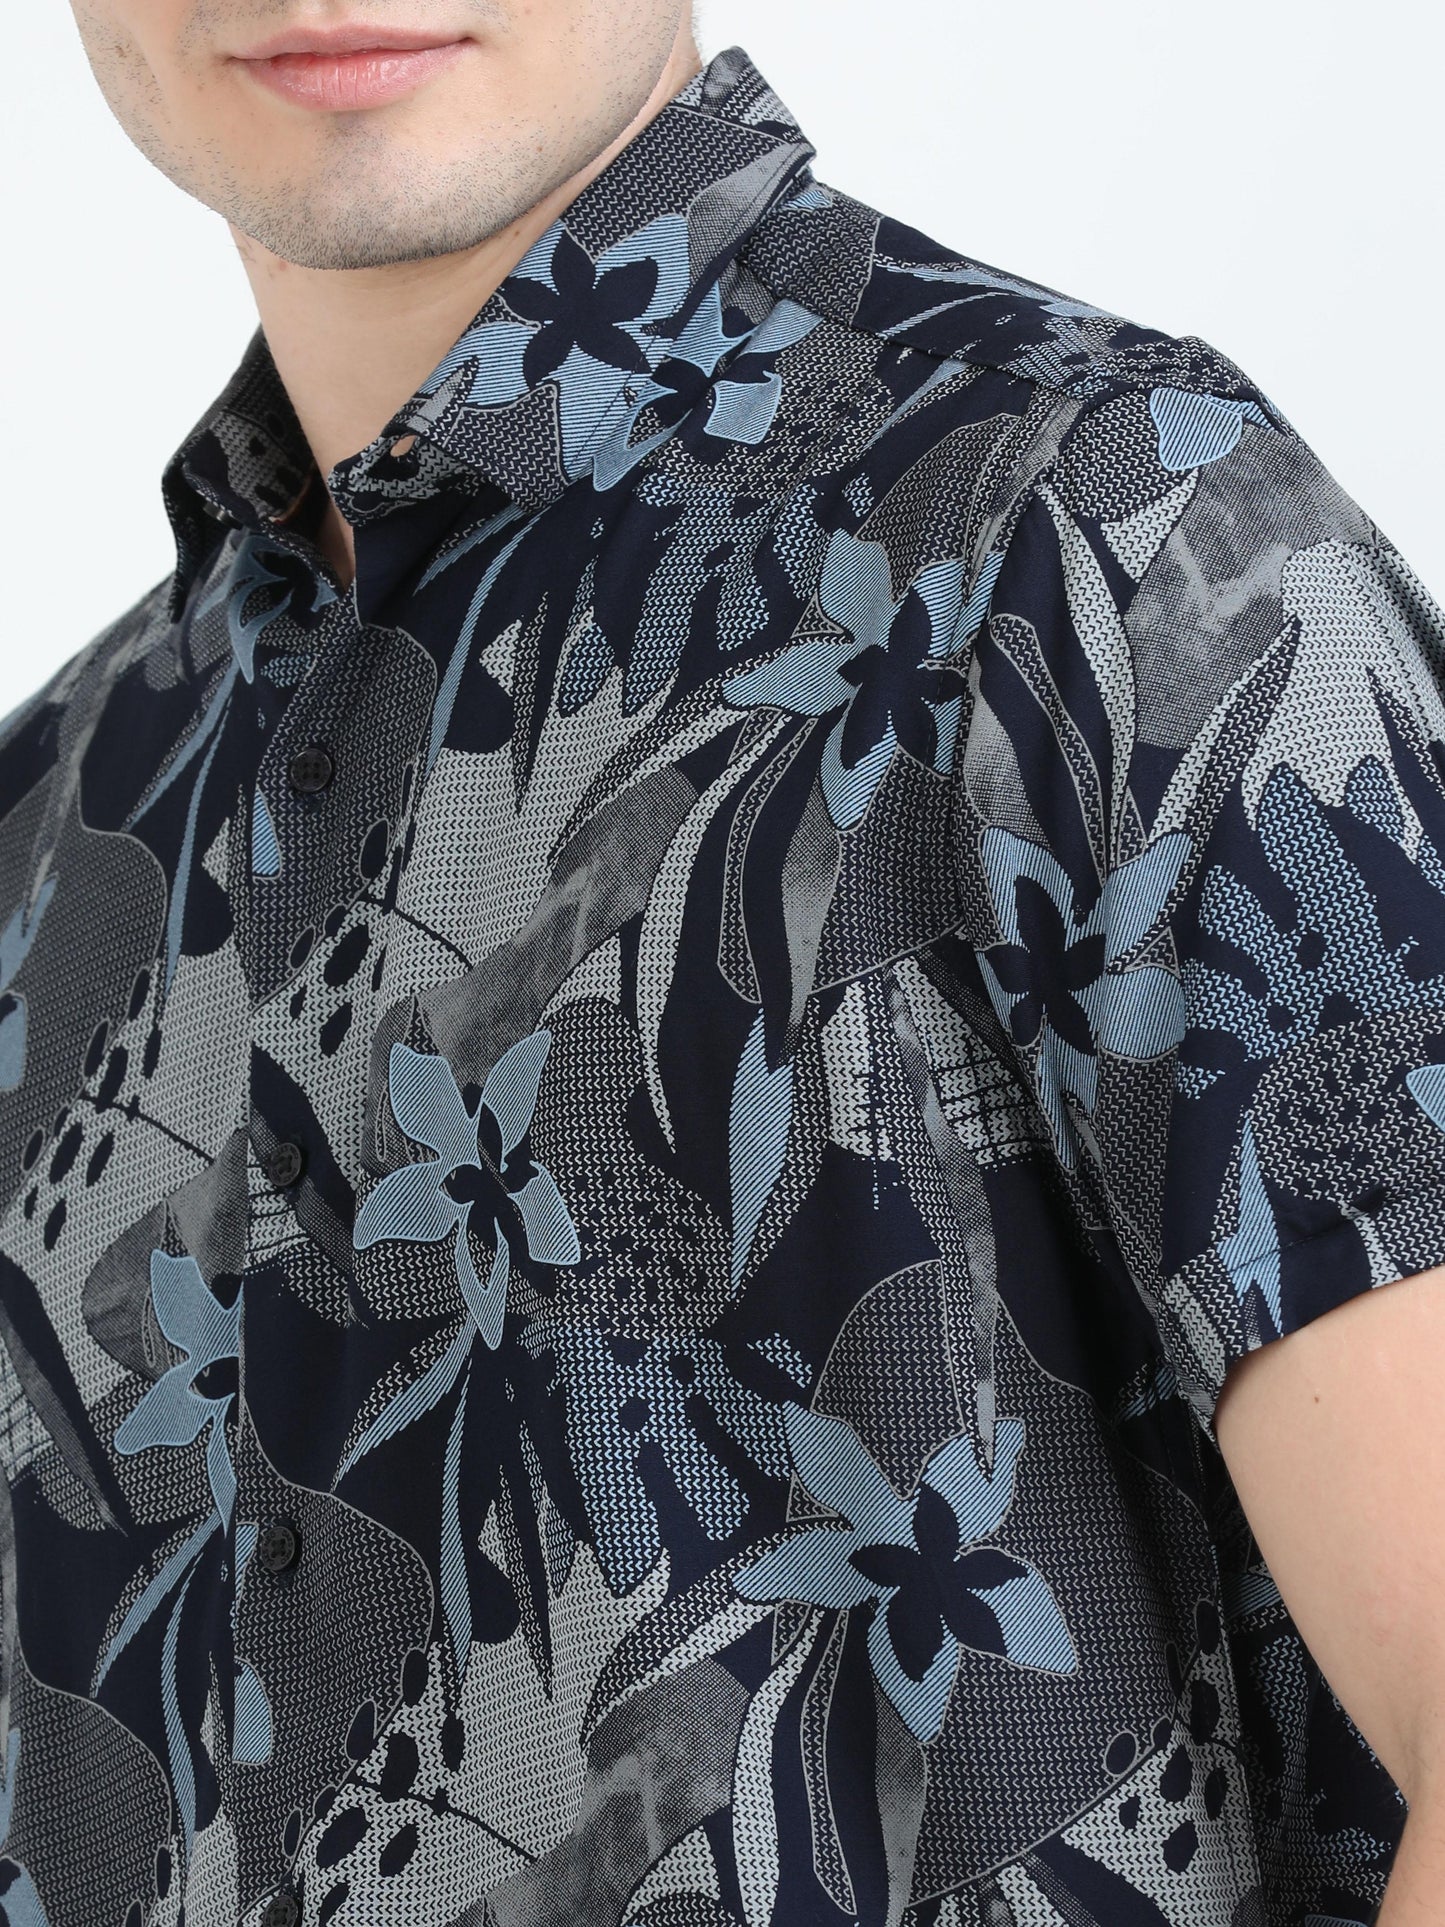 Blue Bayoux Abstract Printed Shirt for Men 